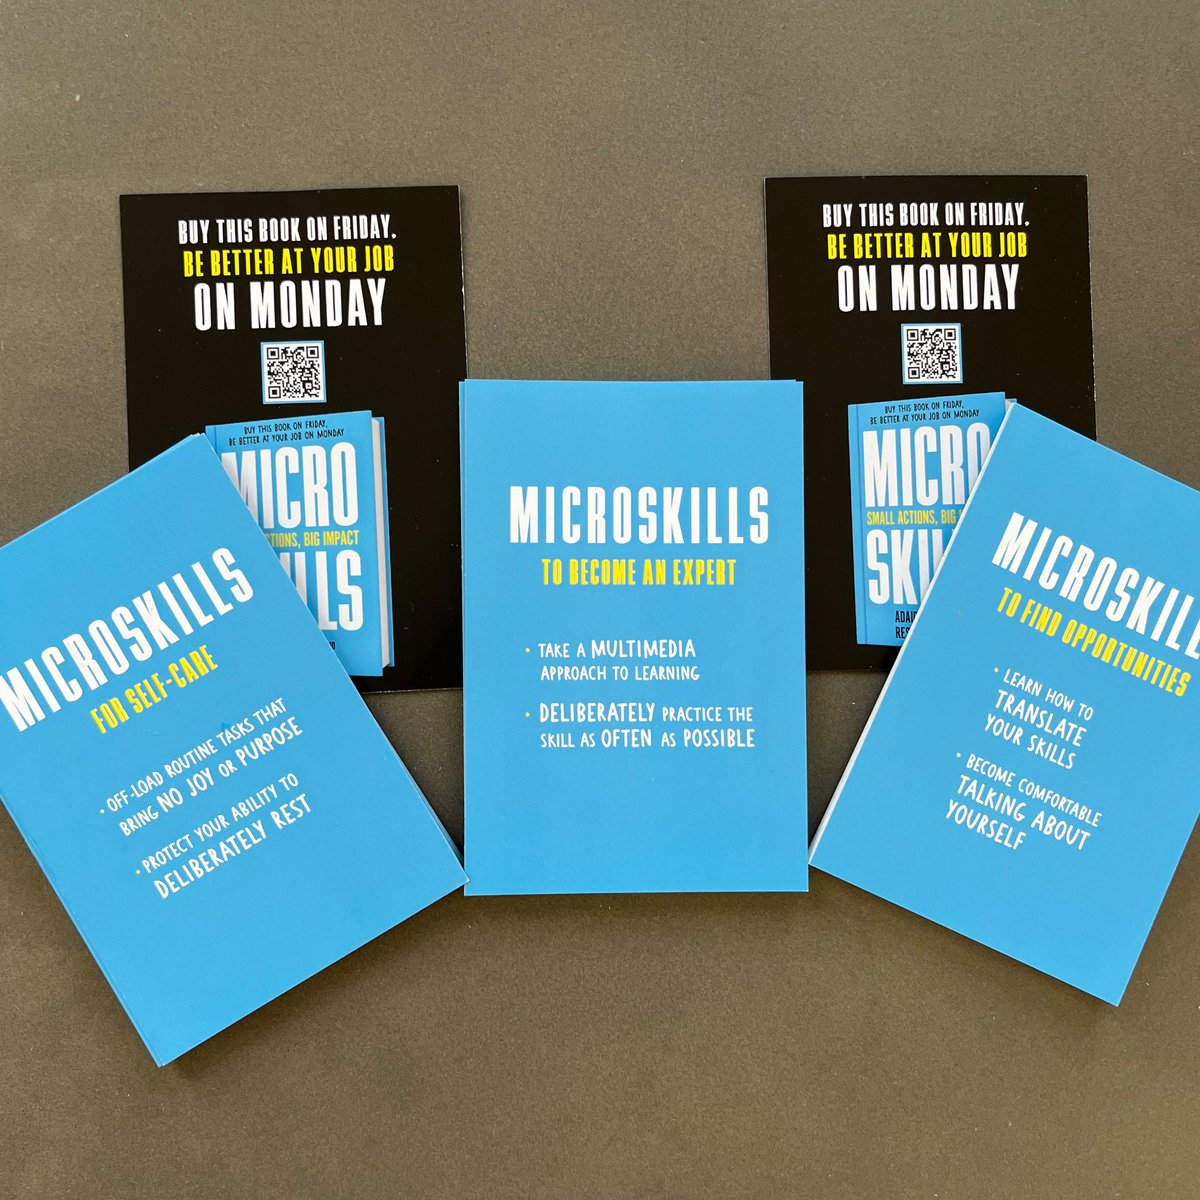 Excited to share these #microskills postcards at upcoming conferences where @AdairaLandryMD and I will speak 🎈 Thank you @HarlequinBooks @HarperCollins @lissa_warren